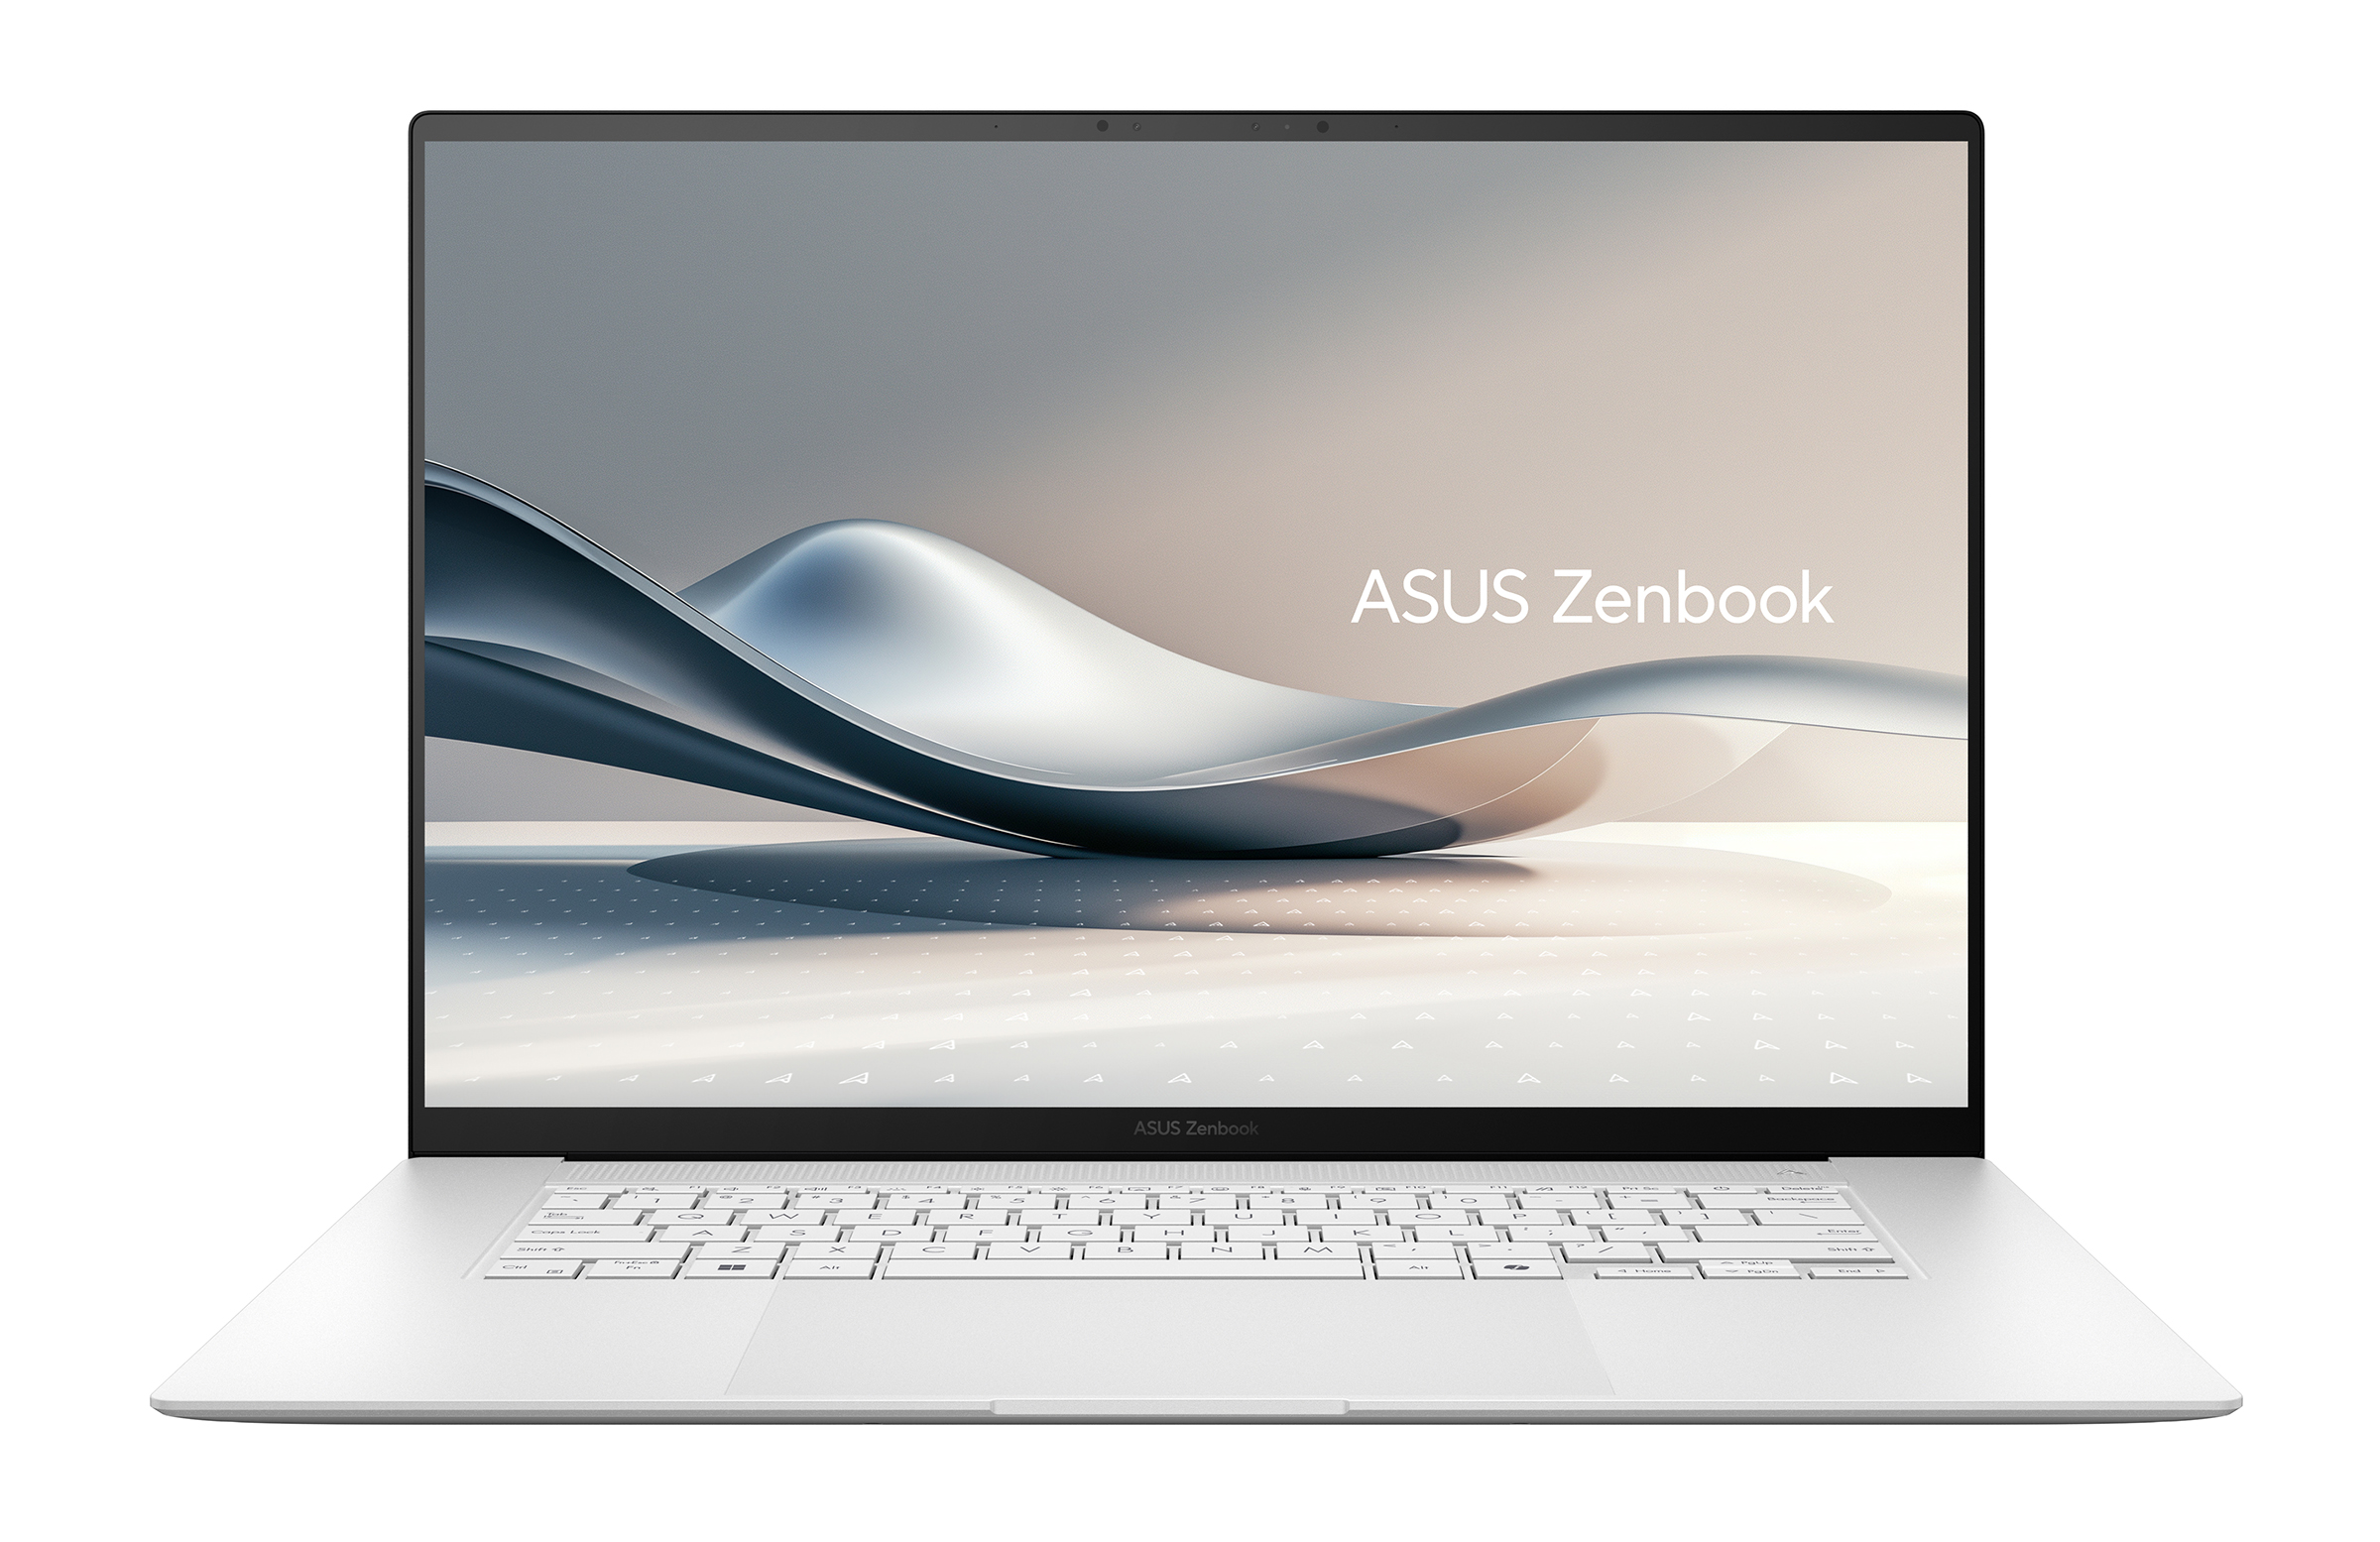 The ASUS Zenbook S16 laptop boasts an ultra-thin design and AMD’s latest AI chip